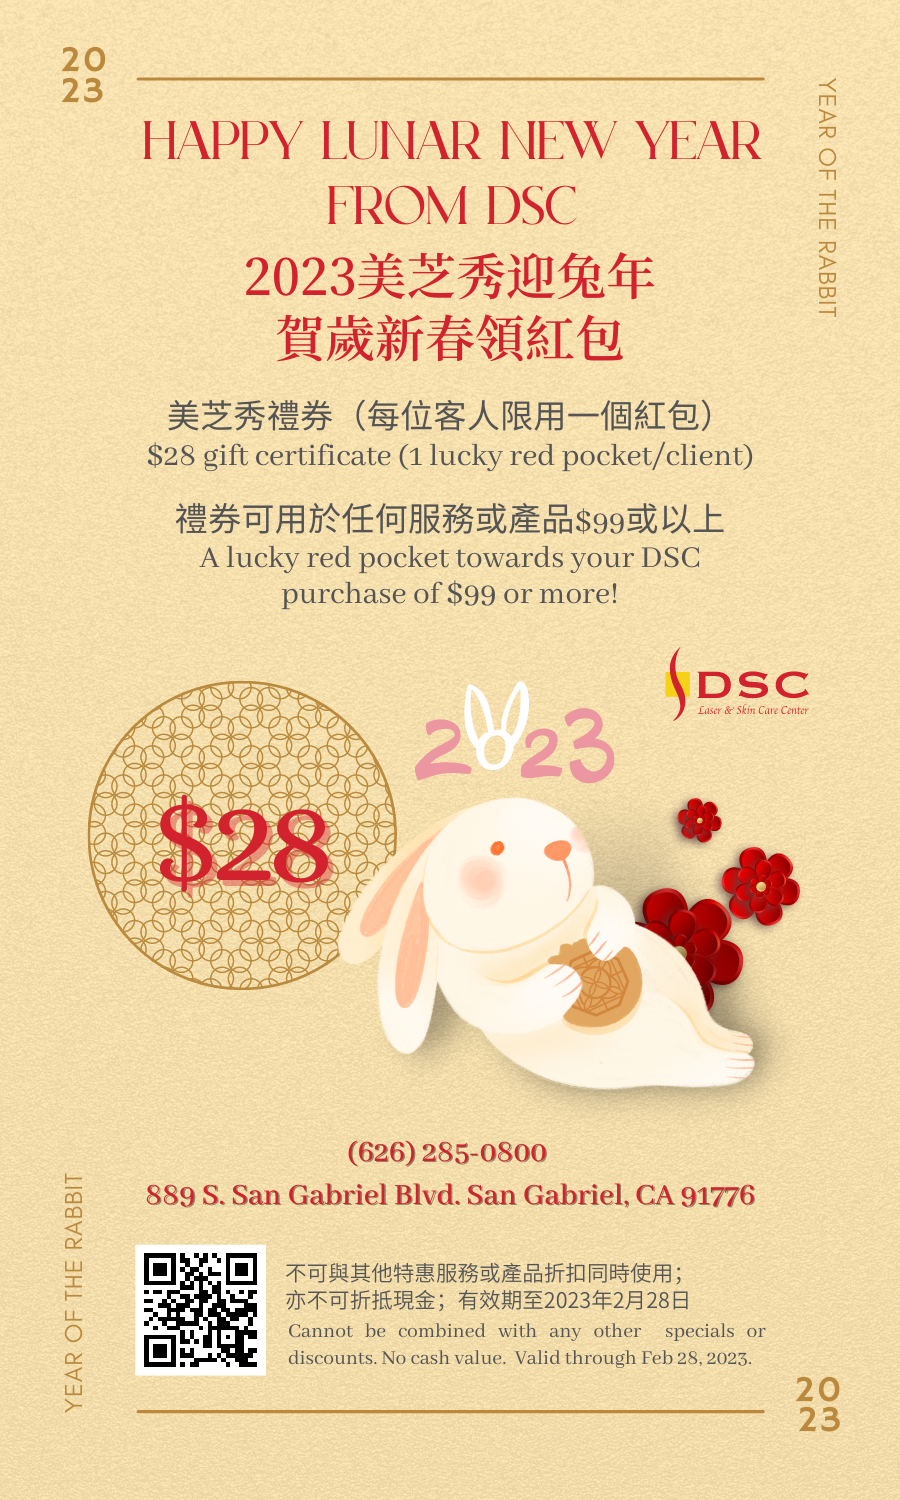 Happy Lunar New Year from DSC text at the top of yellow red pocket graphic coupon, with $28 discount and a white rabbit in the center